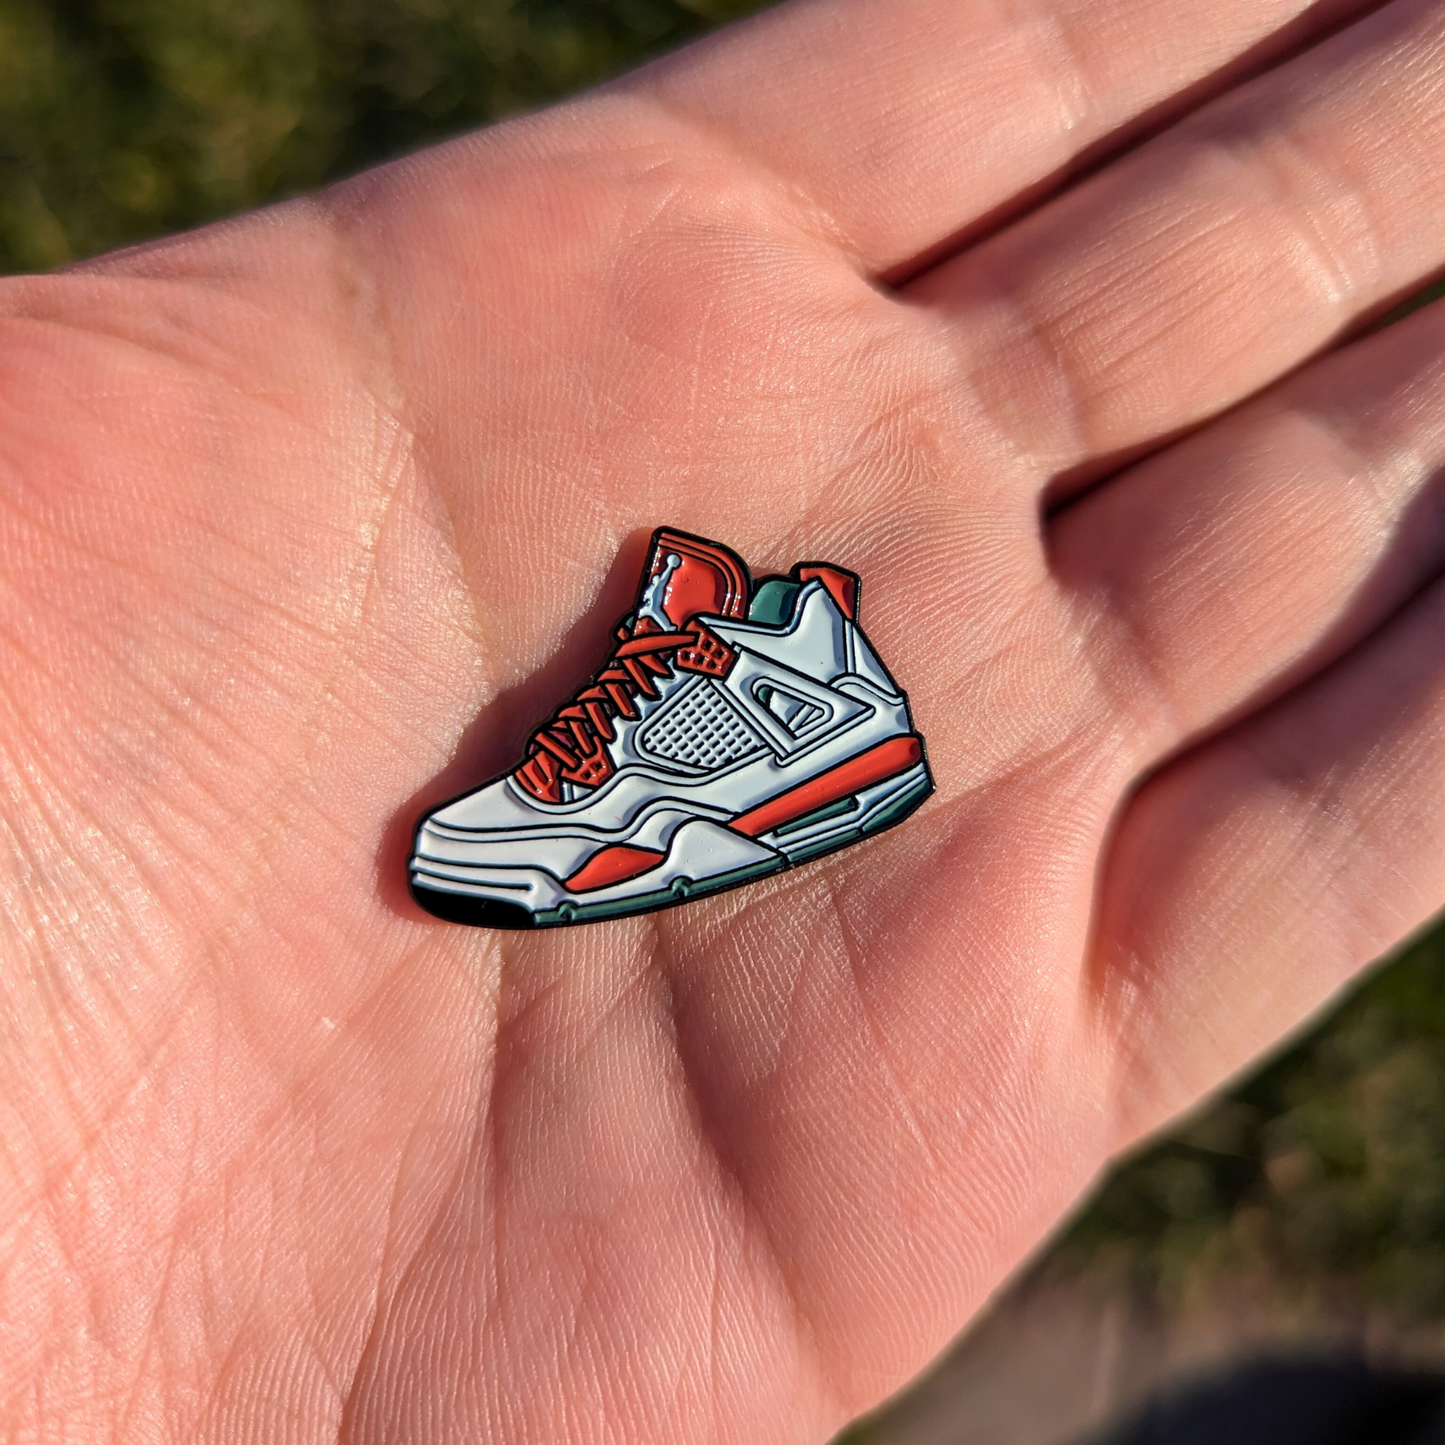 red and white jordans golf ball marker in hand